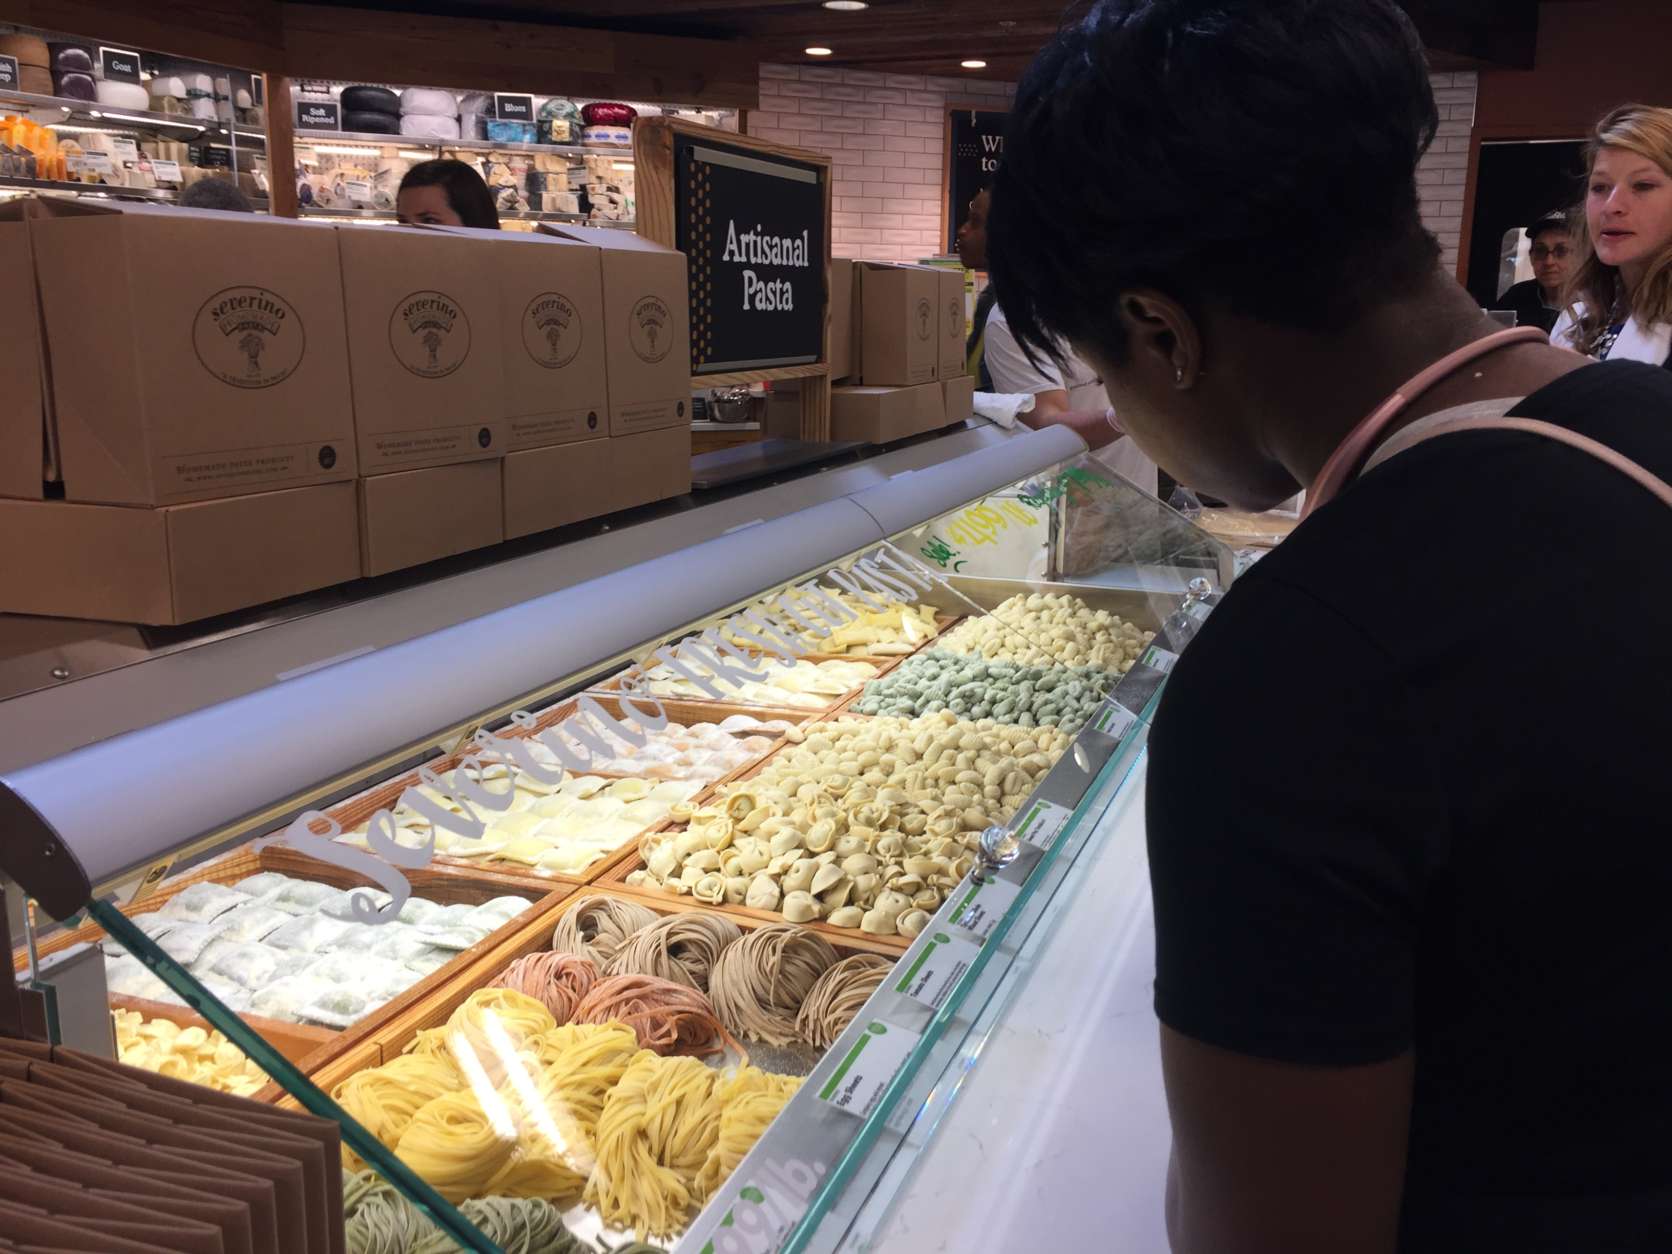 Self-serve fresh pasta is among the choices at Whole Foods Market in Riverdale, Md. (WTOP/Kristi King)